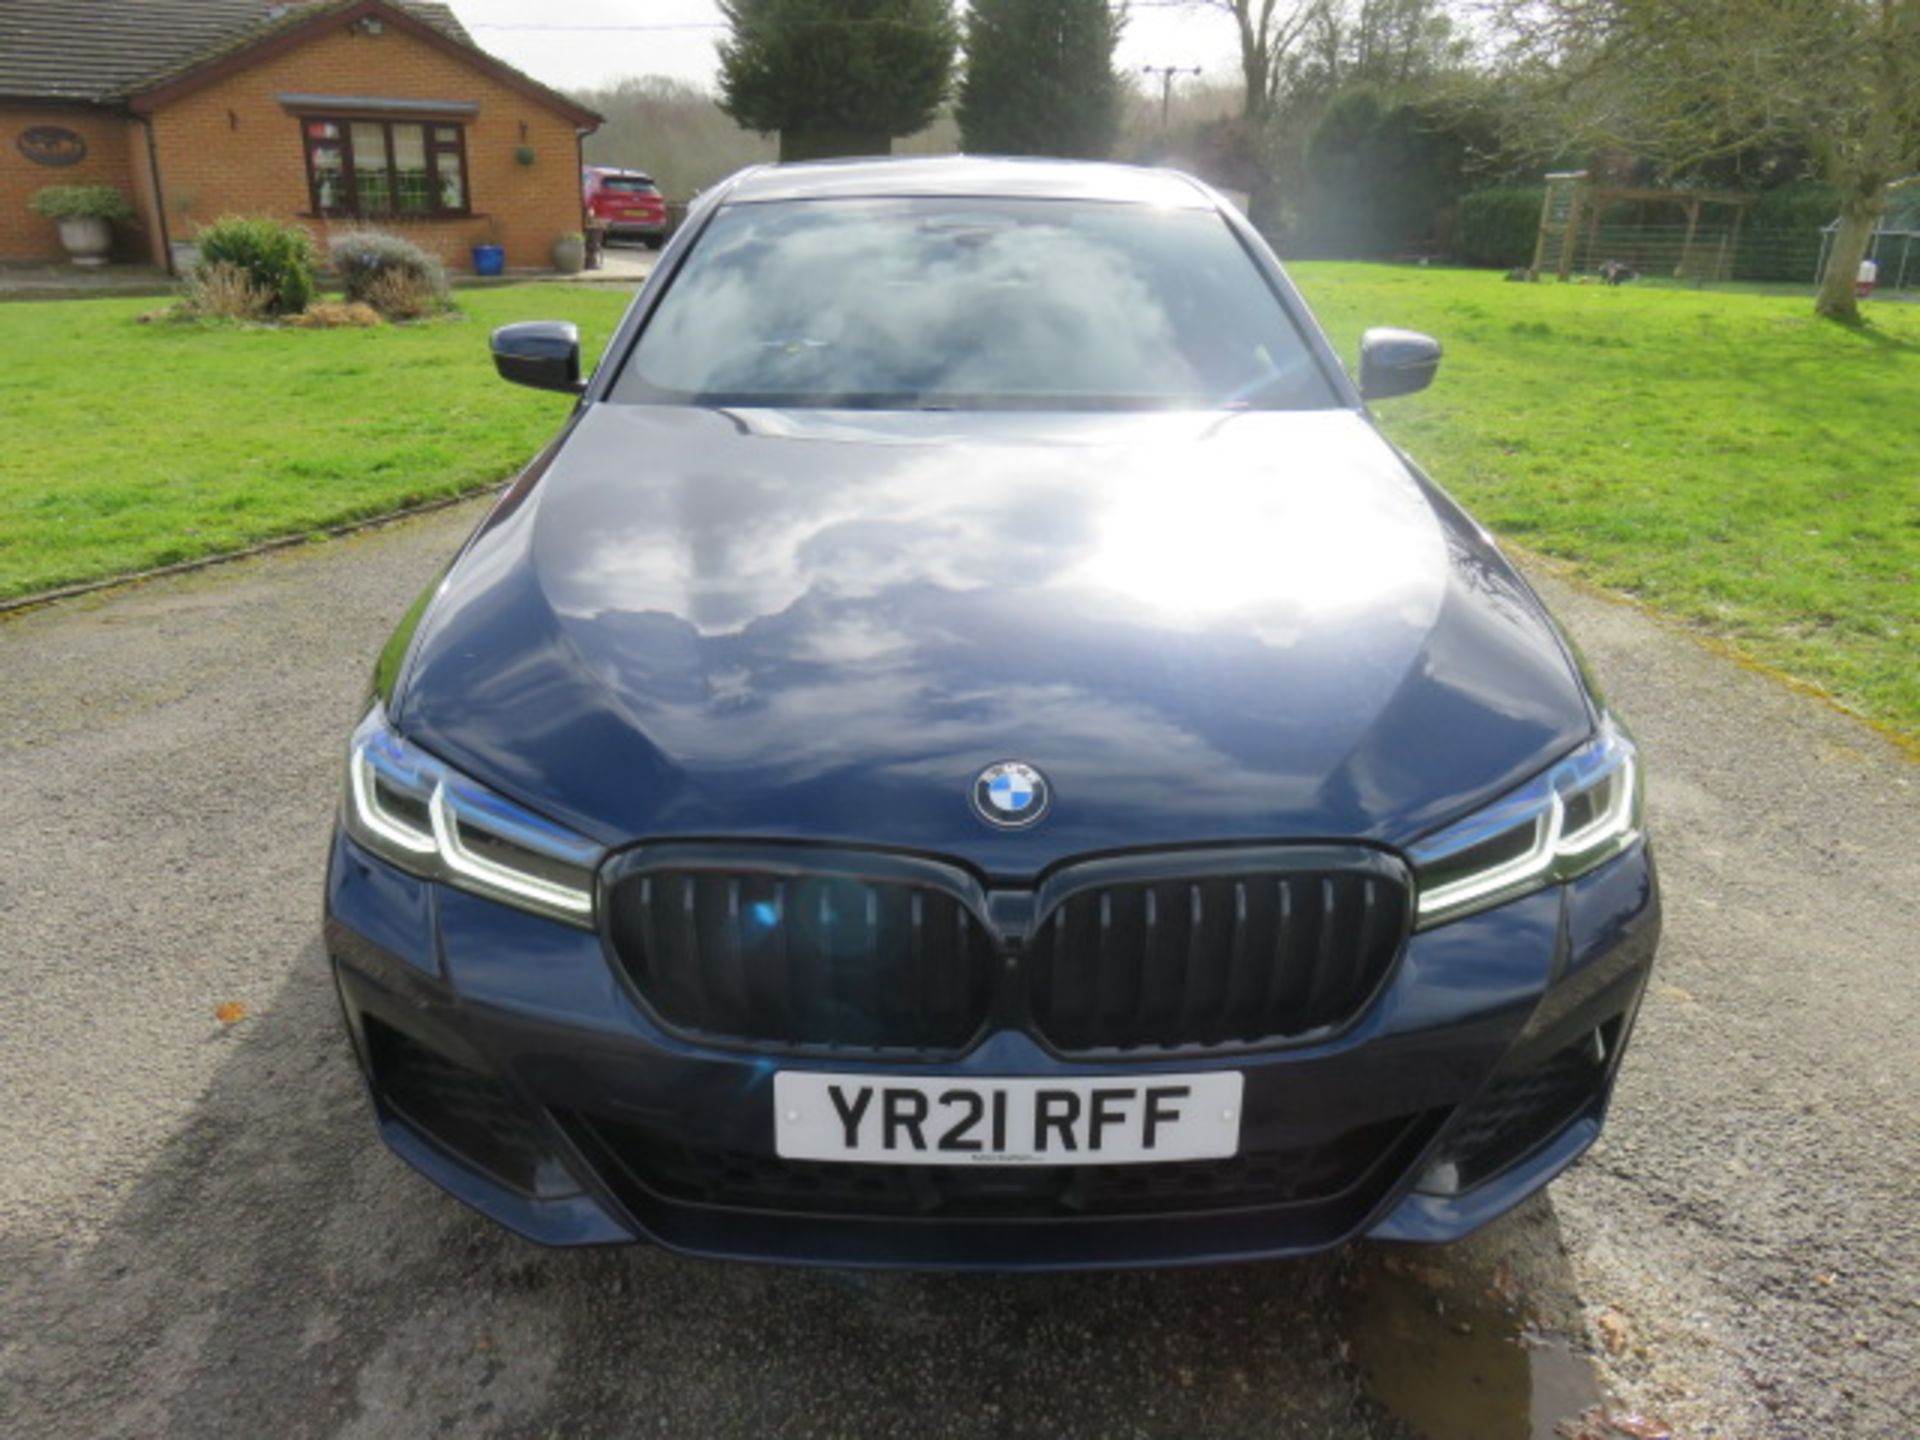 1 BMW 530e XDRIVE M Sport Edition 2.0 Hybrid Electric Four Door Saloon. - Image 2 of 15